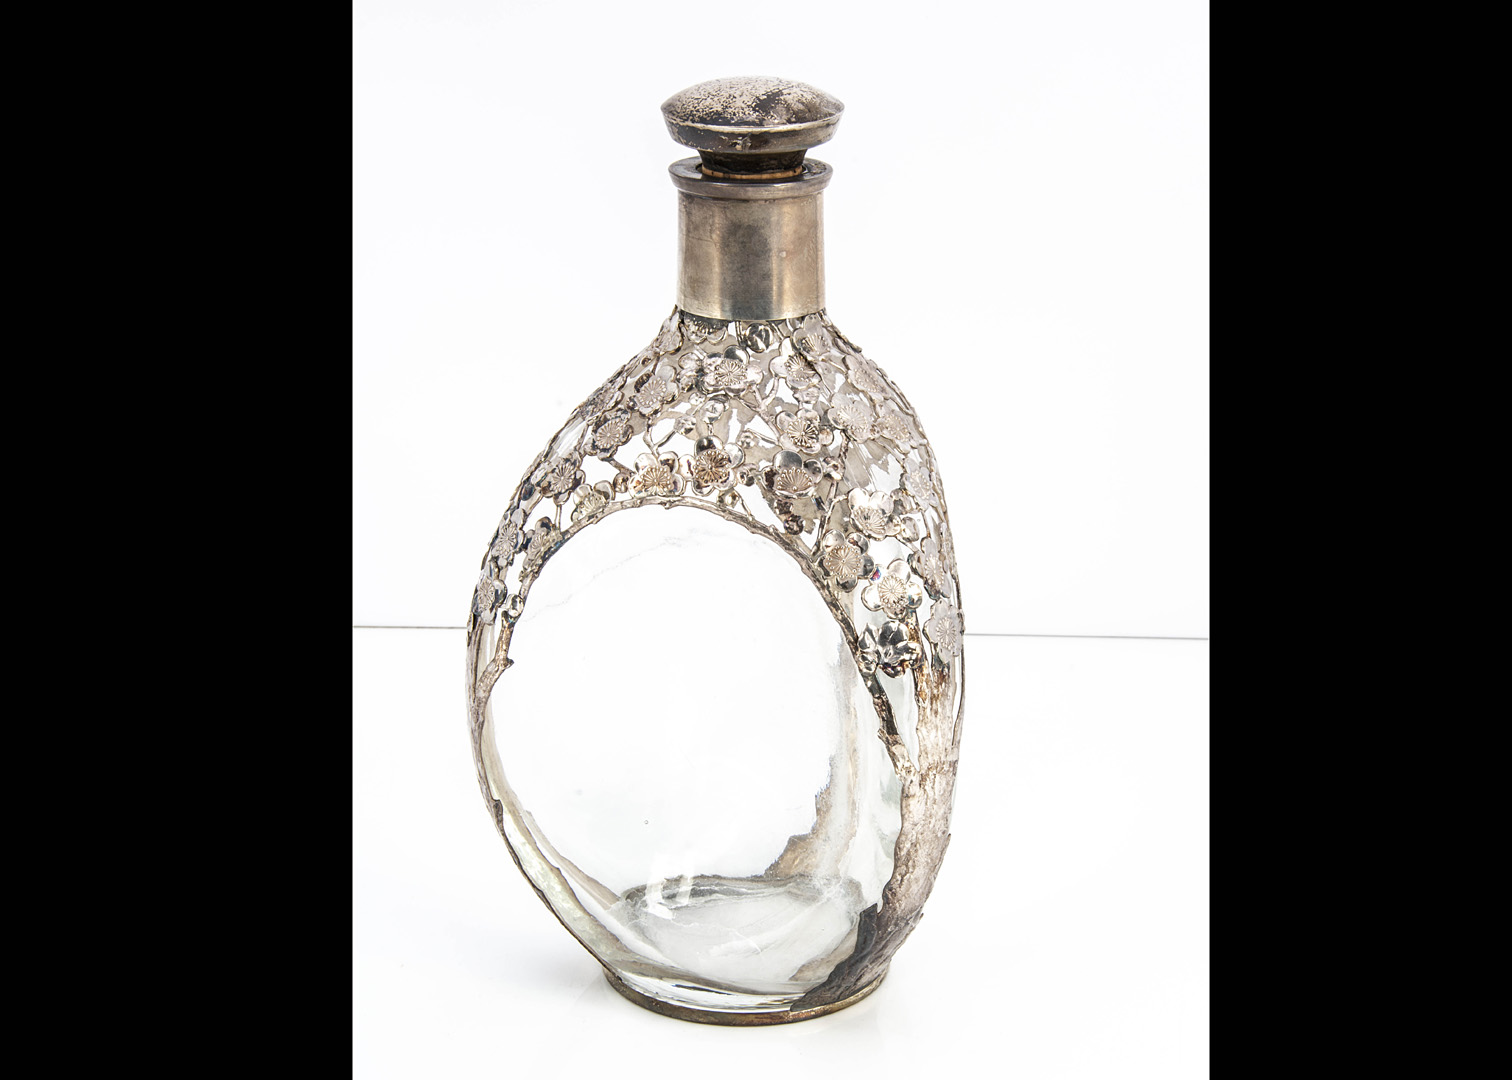 A mid 20th century white metal mounted Haig whisky bottle, marked Sterling, with stopper